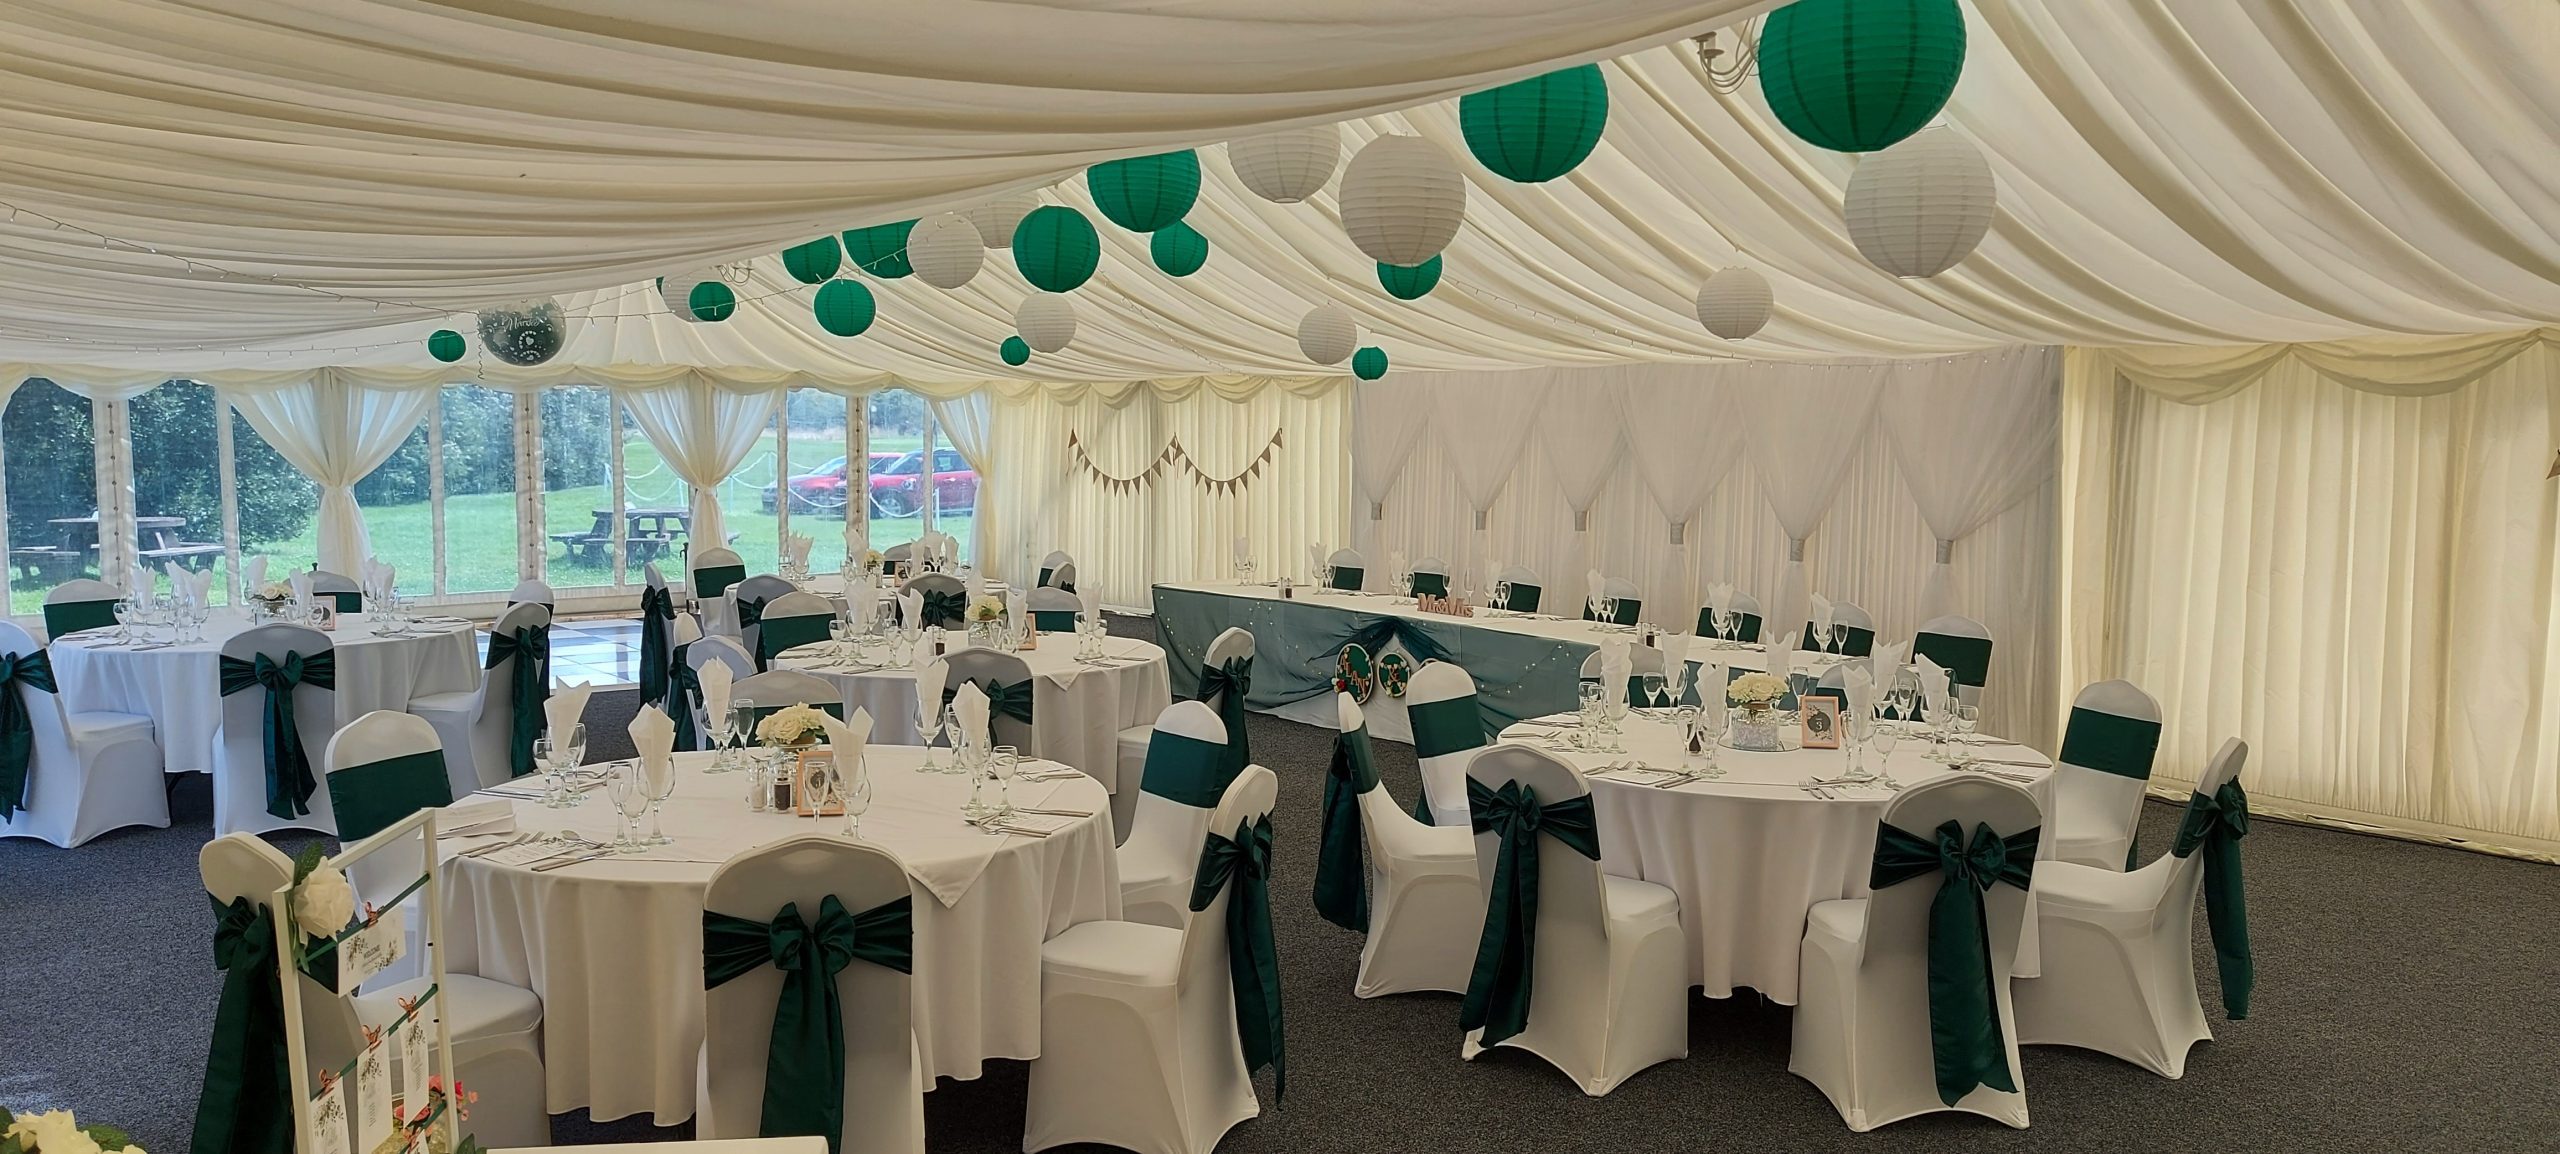 Inflate 2 Inflate on Tie The Knot Wedding Directory